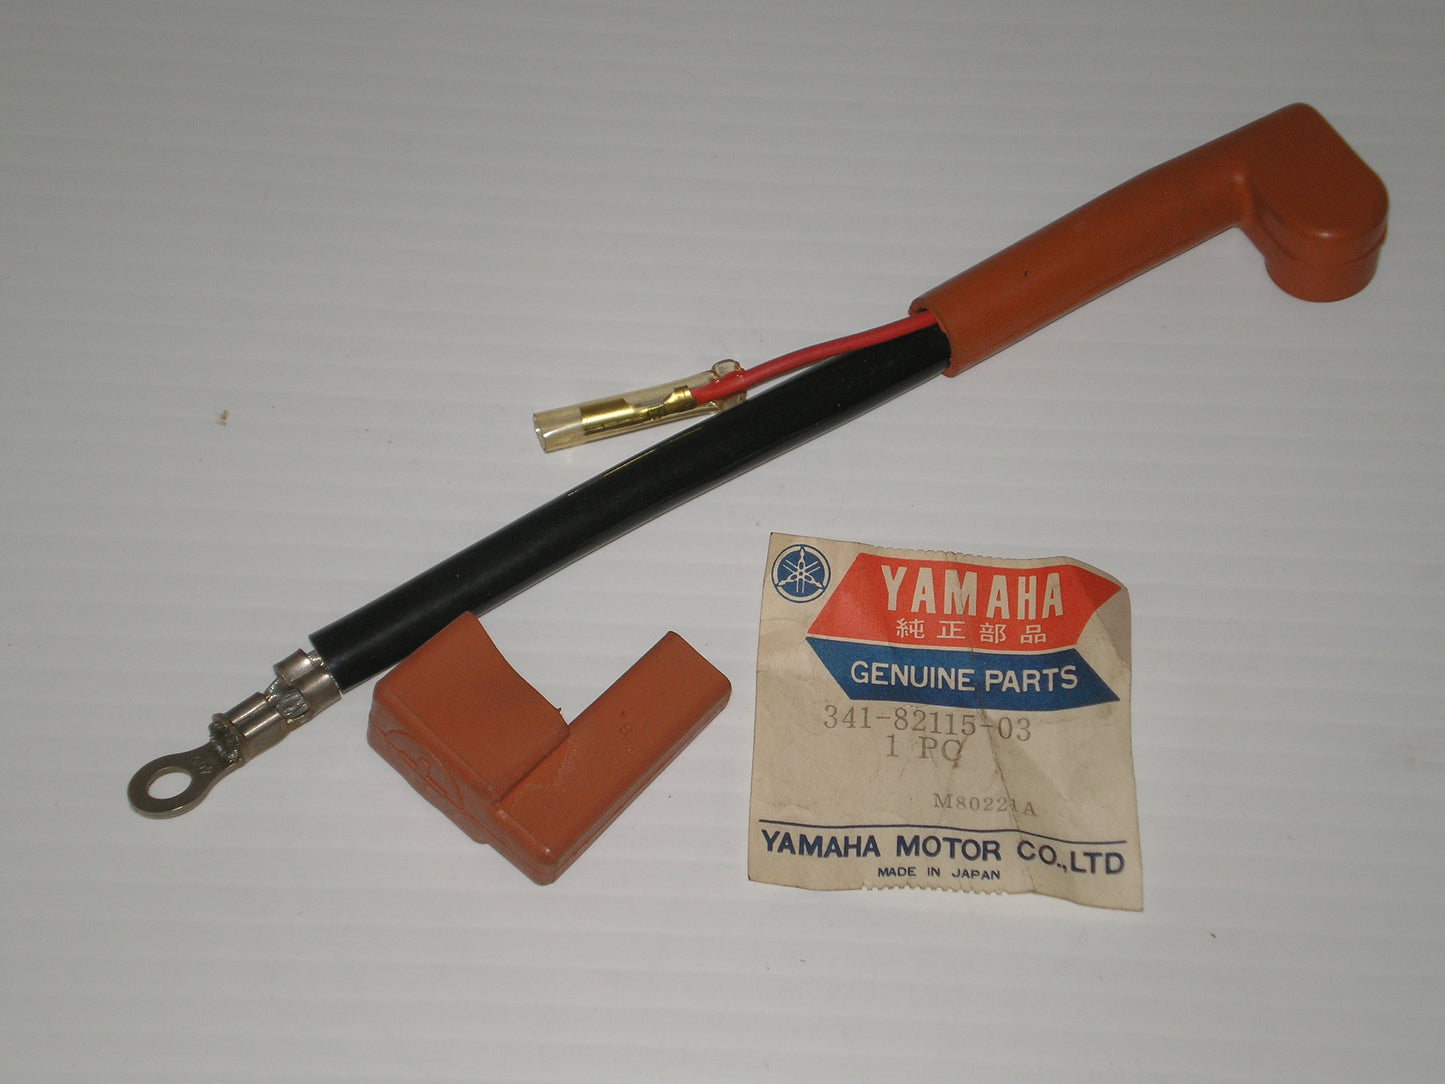 YAMAHA TX750  Factory Battery Positive / Plus Lead Wire 341-82115-03